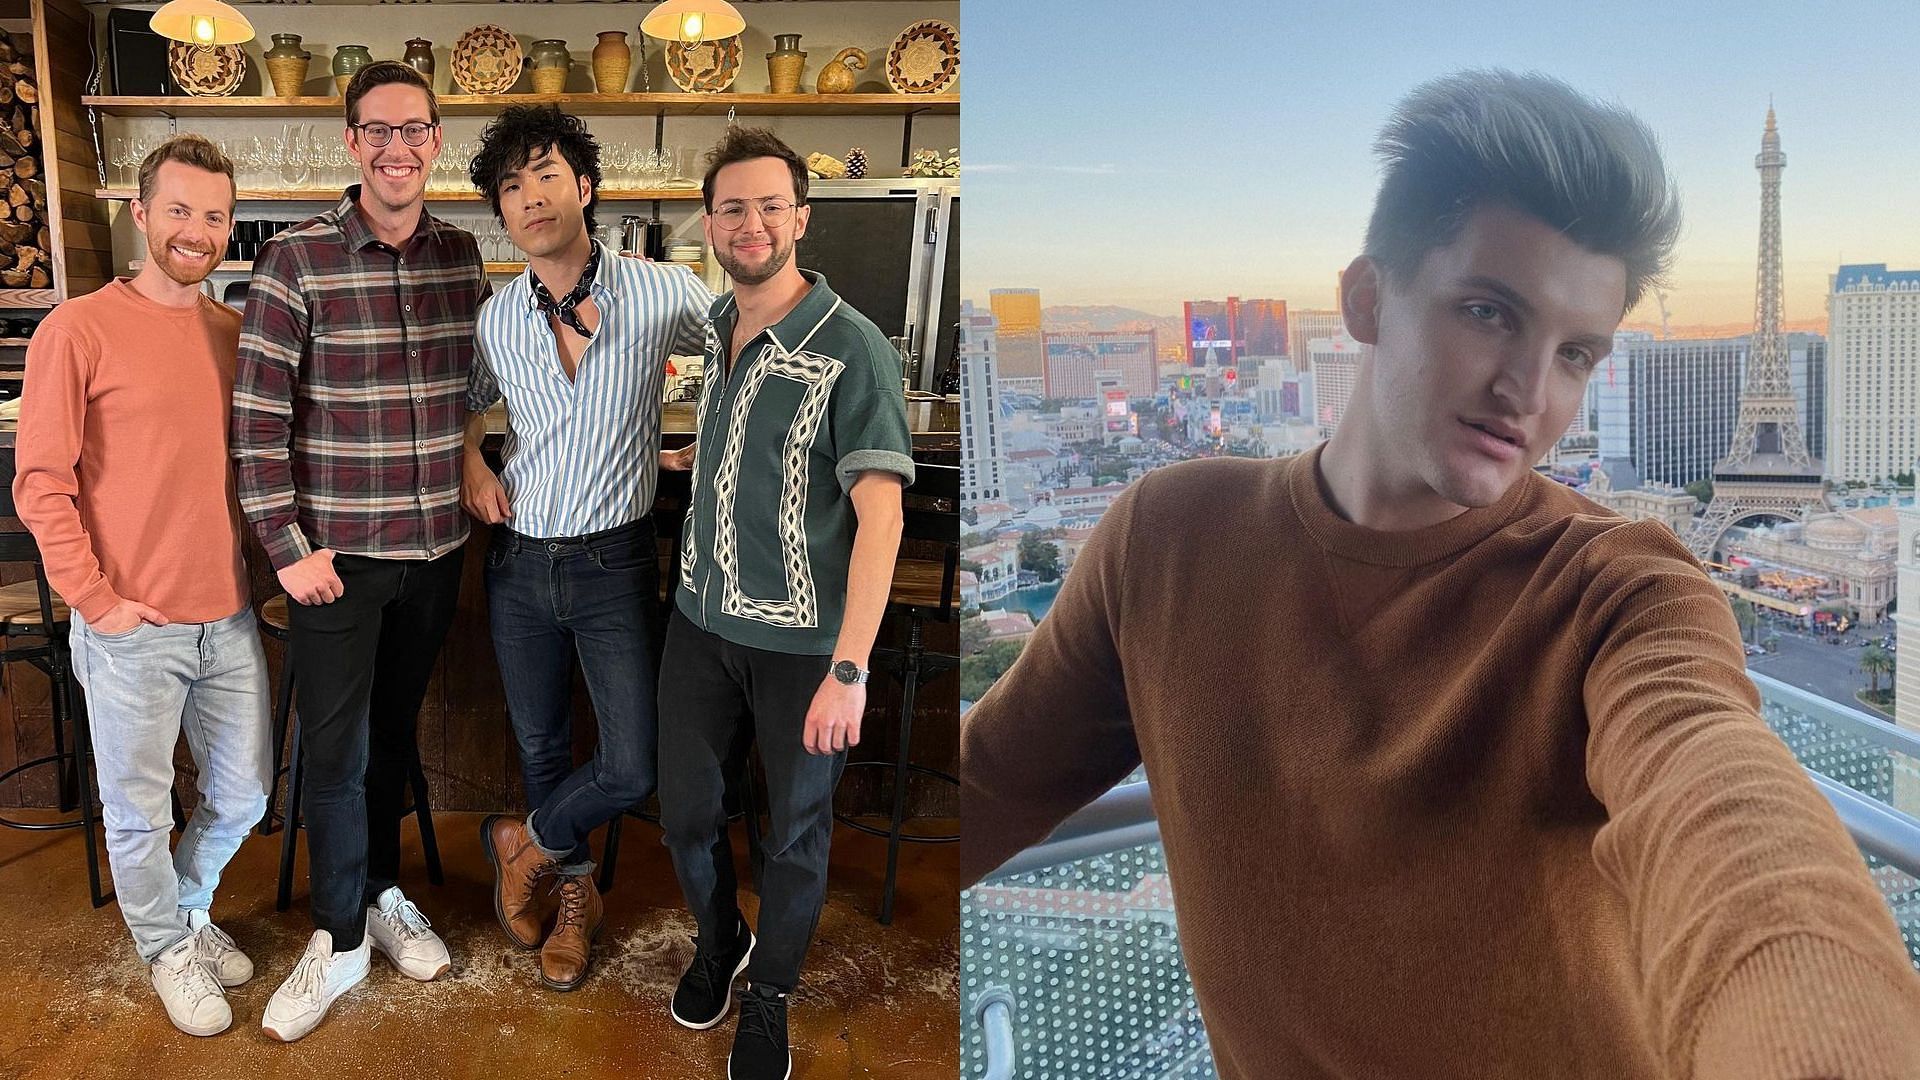 (left) The Try Guys and (right) Jake Larosa. (Images via Instagram/@tryguys and Instagram/@jakelarosa)